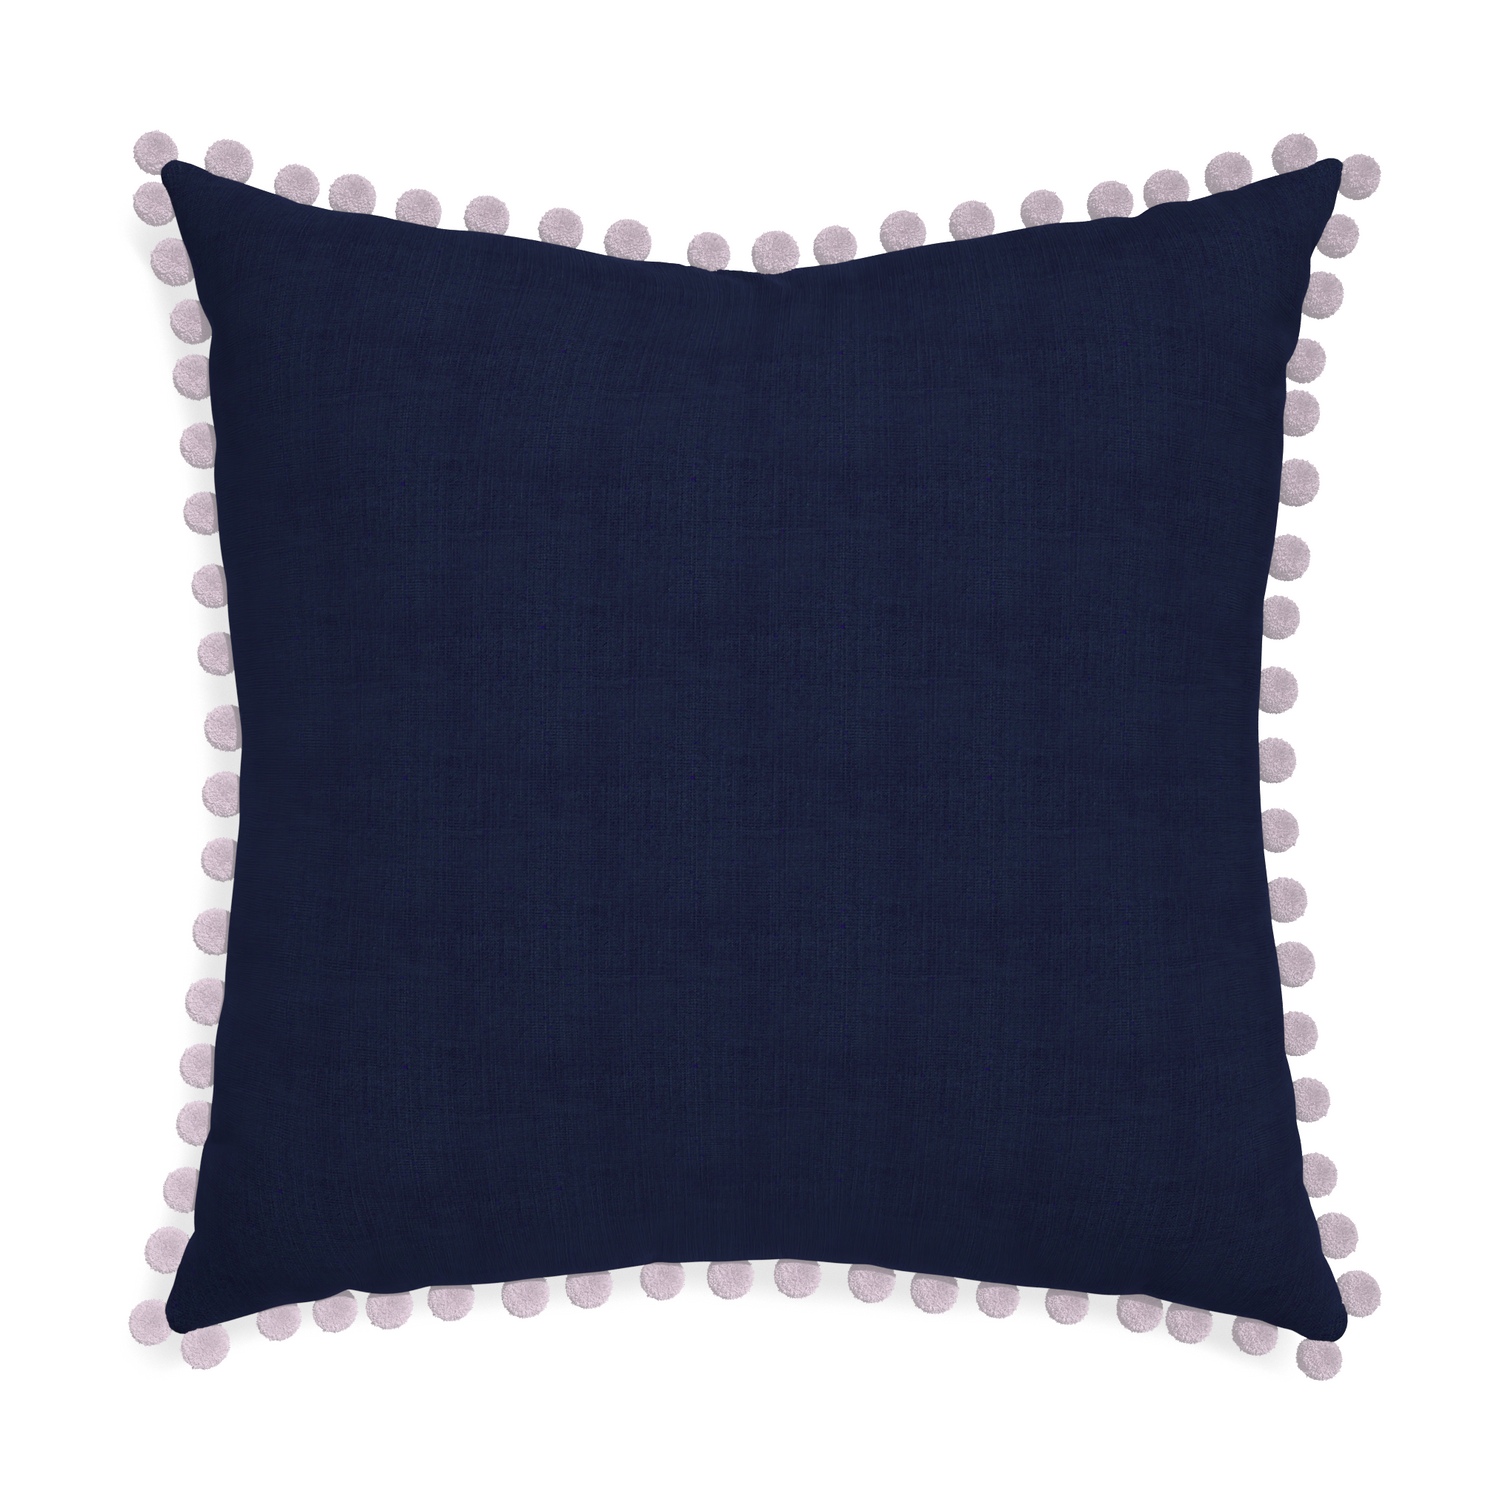 Euro-sham midnight custom pillow with l on white background